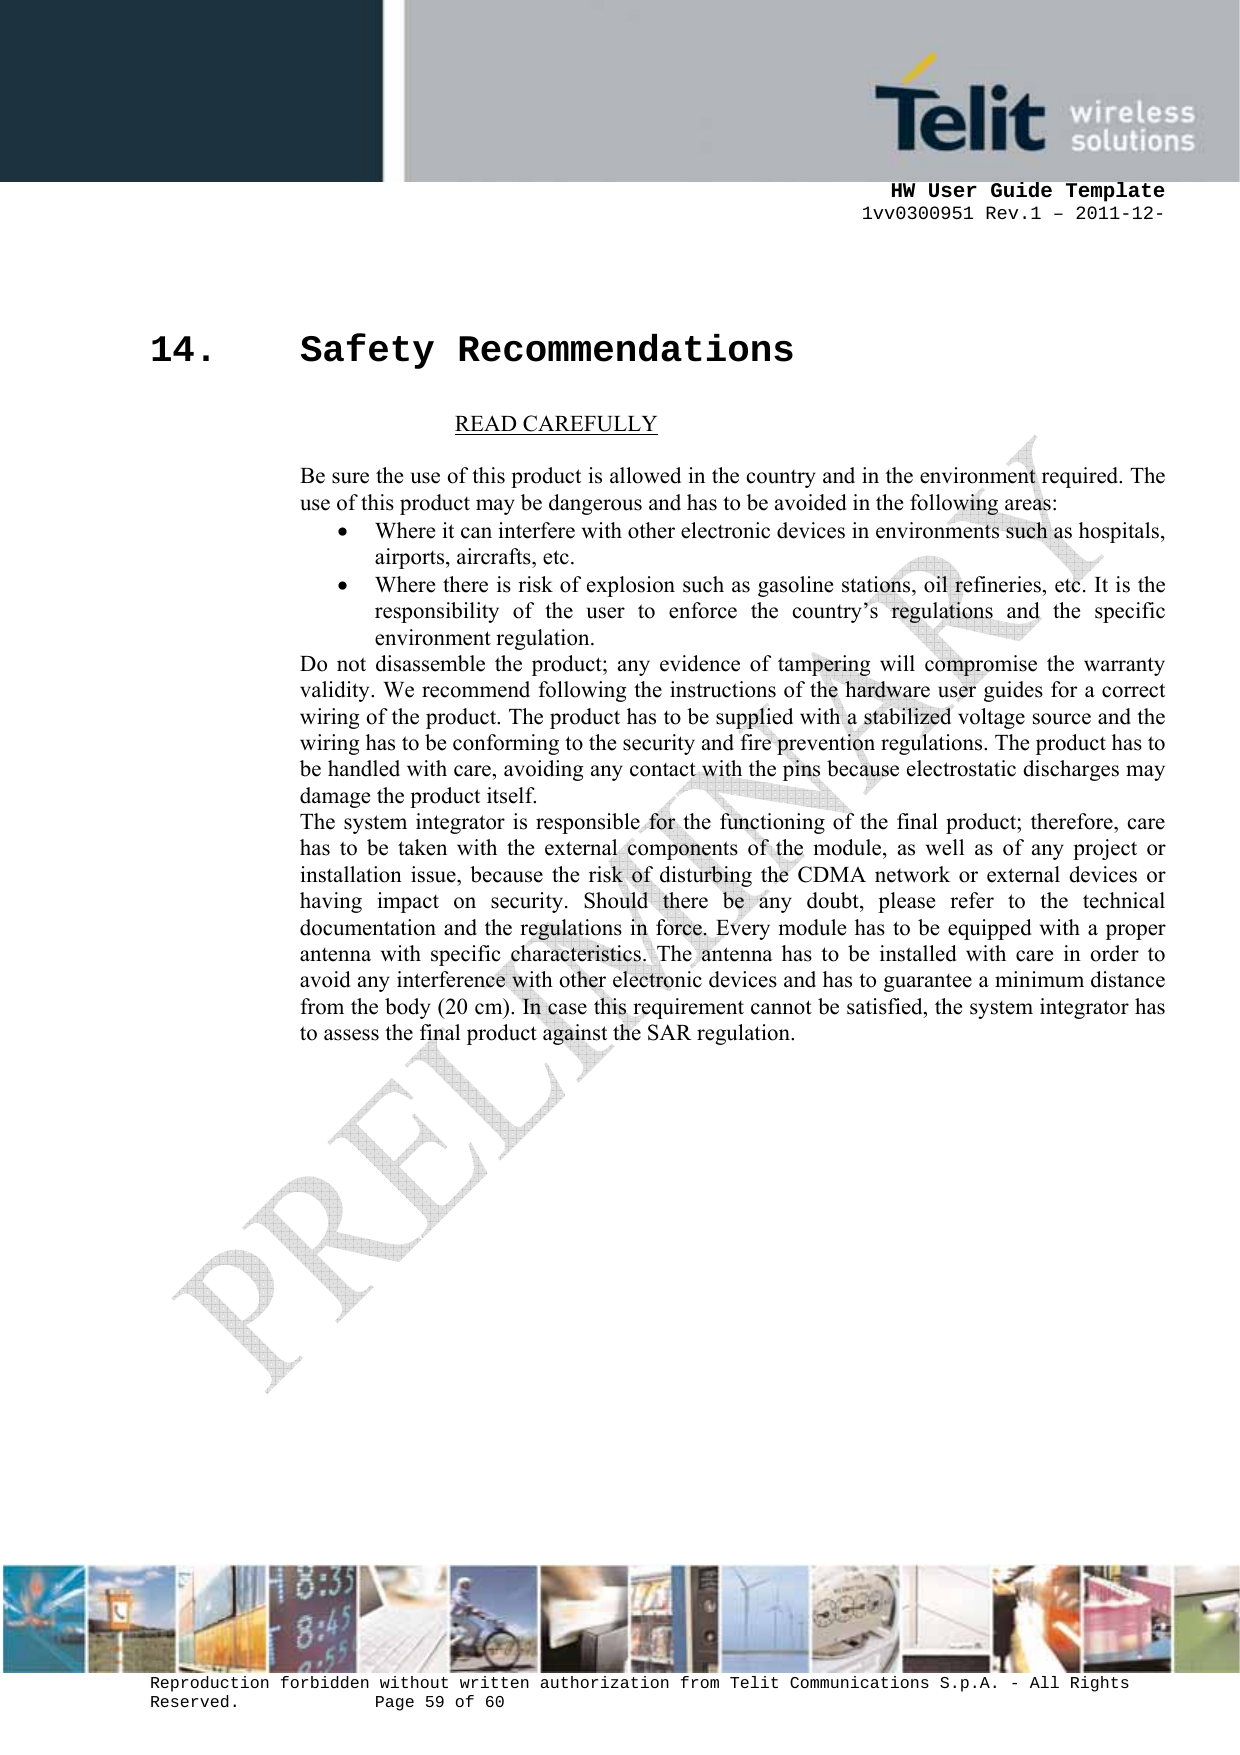      HW User Guide Template 1vv0300951 Rev.1 – 2011-12-  Reproduction forbidden without written authorization from Telit Communications S.p.A. - All Rights Reserved.    Page 59 of 60                                                     14. Safety Recommendations                            READ CAREFULLY  Be sure the use of this product is allowed in the country and in the environment required. The use of this product may be dangerous and has to be avoided in the following areas: • Where it can interfere with other electronic devices in environments such as hospitals, airports, aircrafts, etc. • Where there is risk of explosion such as gasoline stations, oil refineries, etc. It is the responsibility of the user to enforce the country’s regulations and the specific environment regulation. Do not disassemble the product; any evidence of tampering will compromise the warranty validity. We recommend following the instructions of the hardware user guides for a correct wiring of the product. The product has to be supplied with a stabilized voltage source and the wiring has to be conforming to the security and fire prevention regulations. The product has to be handled with care, avoiding any contact with the pins because electrostatic discharges may damage the product itself.  The system integrator is responsible for the functioning of the final product; therefore, care has to be taken with the external components of the module, as well as of any project or installation issue, because the risk of disturbing the CDMA network or external devices or having impact on security. Should there be any doubt, please refer to the technical documentation and the regulations in force. Every module has to be equipped with a proper antenna with specific characteristics. The antenna has to be installed with care in order to avoid any interference with other electronic devices and has to guarantee a minimum distance from the body (20 cm). In case this requirement cannot be satisfied, the system integrator has to assess the final product against the SAR regulation.   